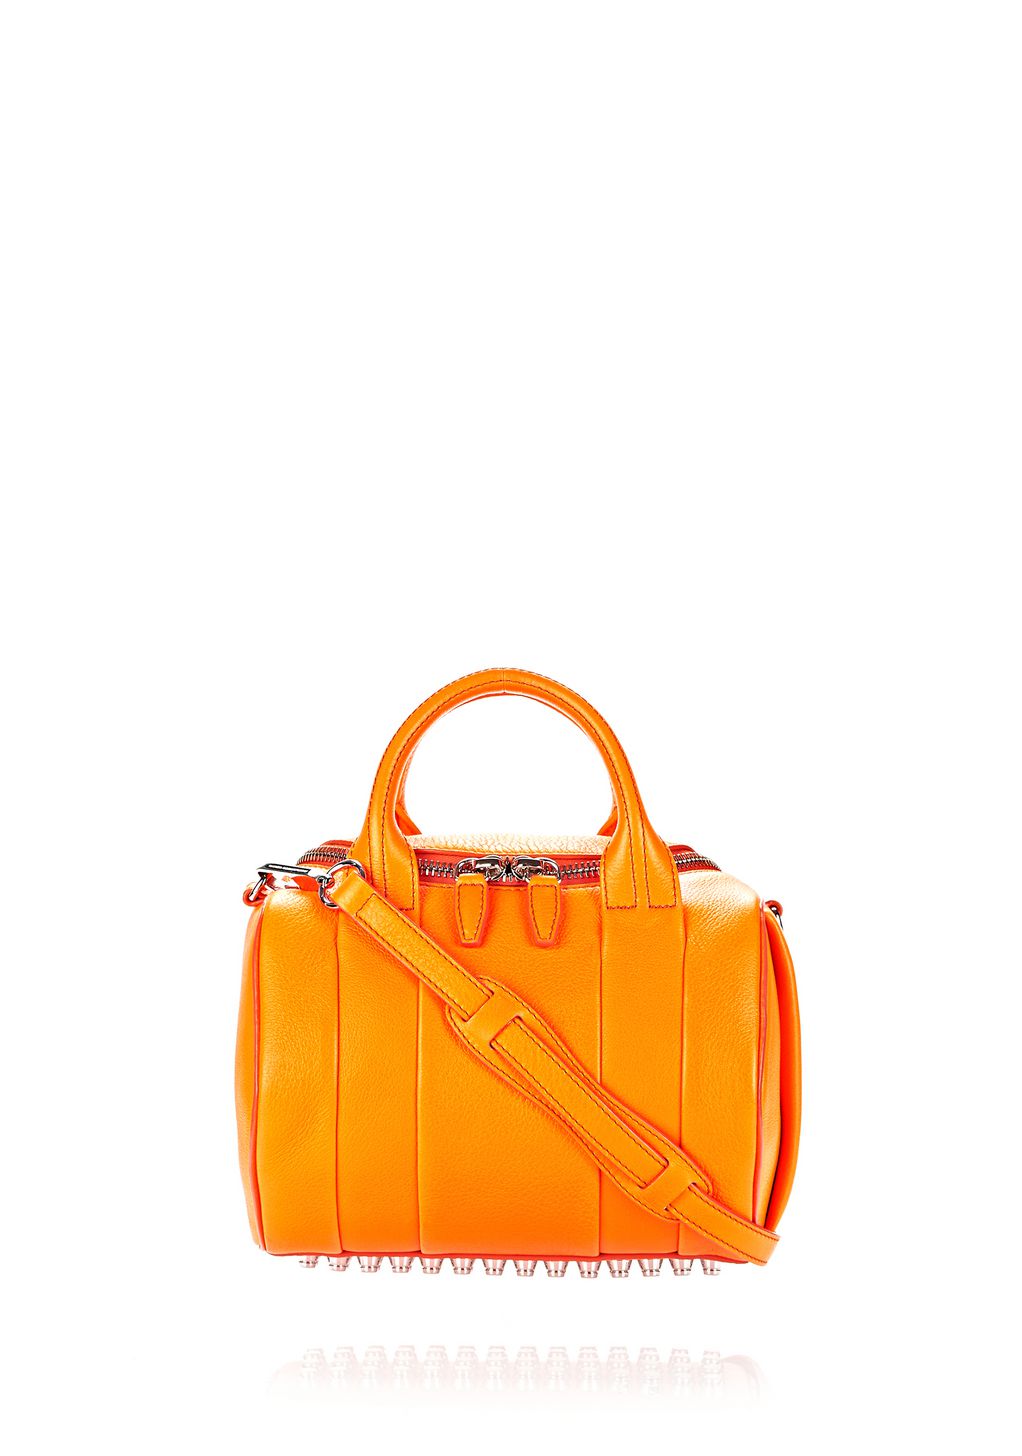 Alexander Wang ‎ROCKIE IN SOFT PEBBLED FLAME WITH RHODIUM ‎ ‎Shoulder ...